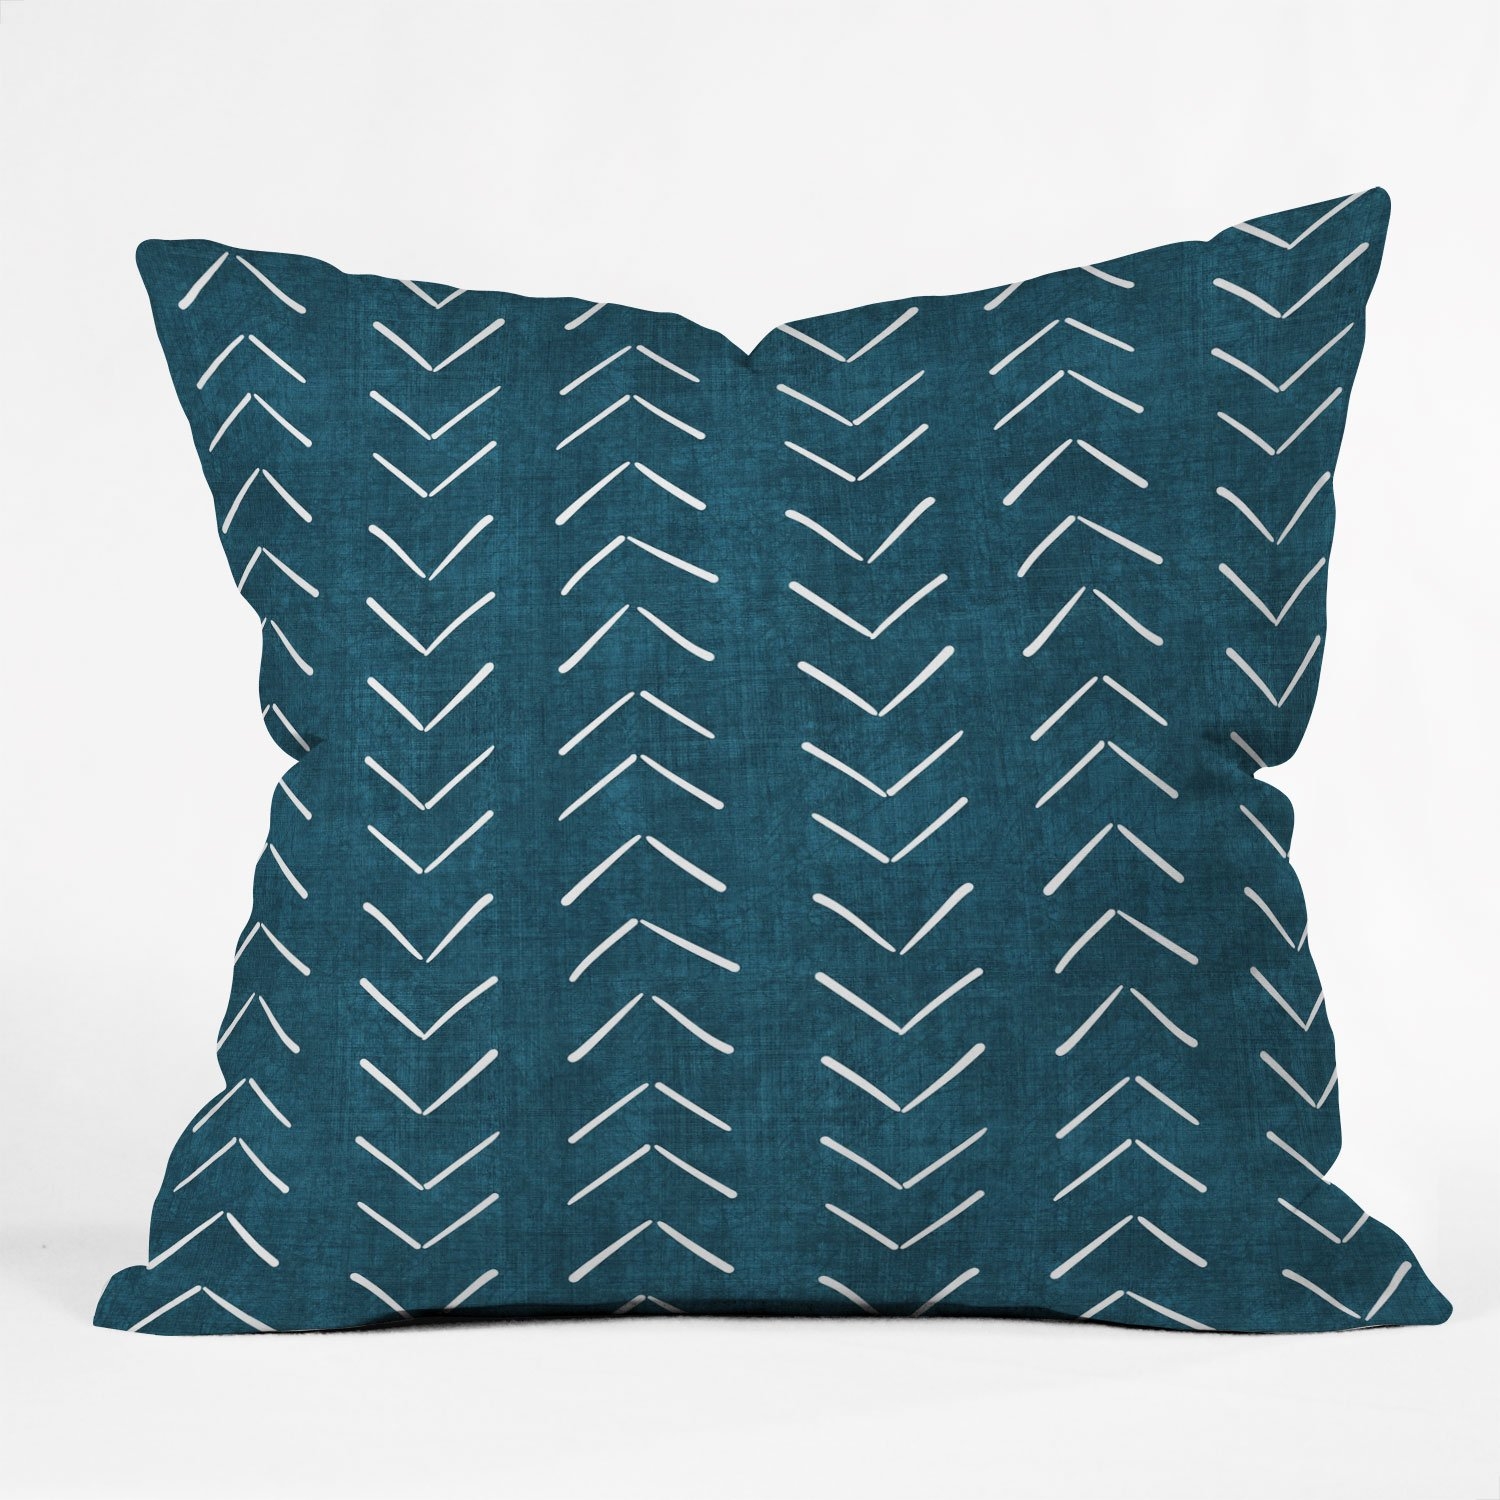 Mud cloth big arrows in teal throw pillow - Image 0